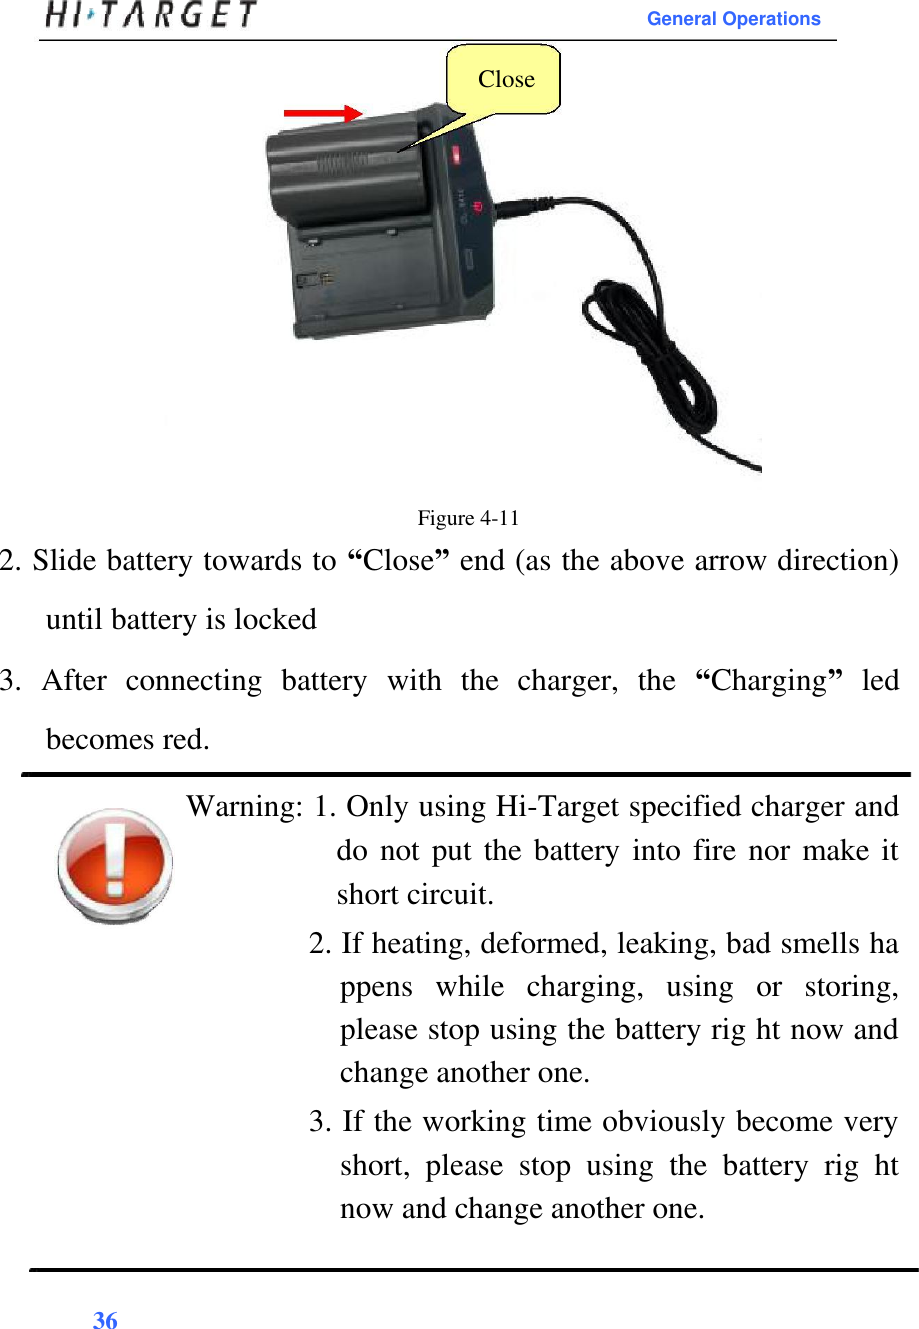 General Operations  Close                    Figure 4-11  2. Slide battery towards to “Close” end (as the above arrow direction) until battery is locked  3.  After  connecting  battery  with  the  charger,  the  “Charging”  led becomes red.  Warning: 1. Only using Hi-Target specified charger and do not put the battery into fire nor make it short circuit.  2. If heating, deformed, leaking, bad smells ha ppens  while  charging,  using  or  storing, please stop using the battery rig ht now and change another one.  3. If the working time obviously become very short,  please  stop  using  the  battery  rig  ht now and change another one.   36   